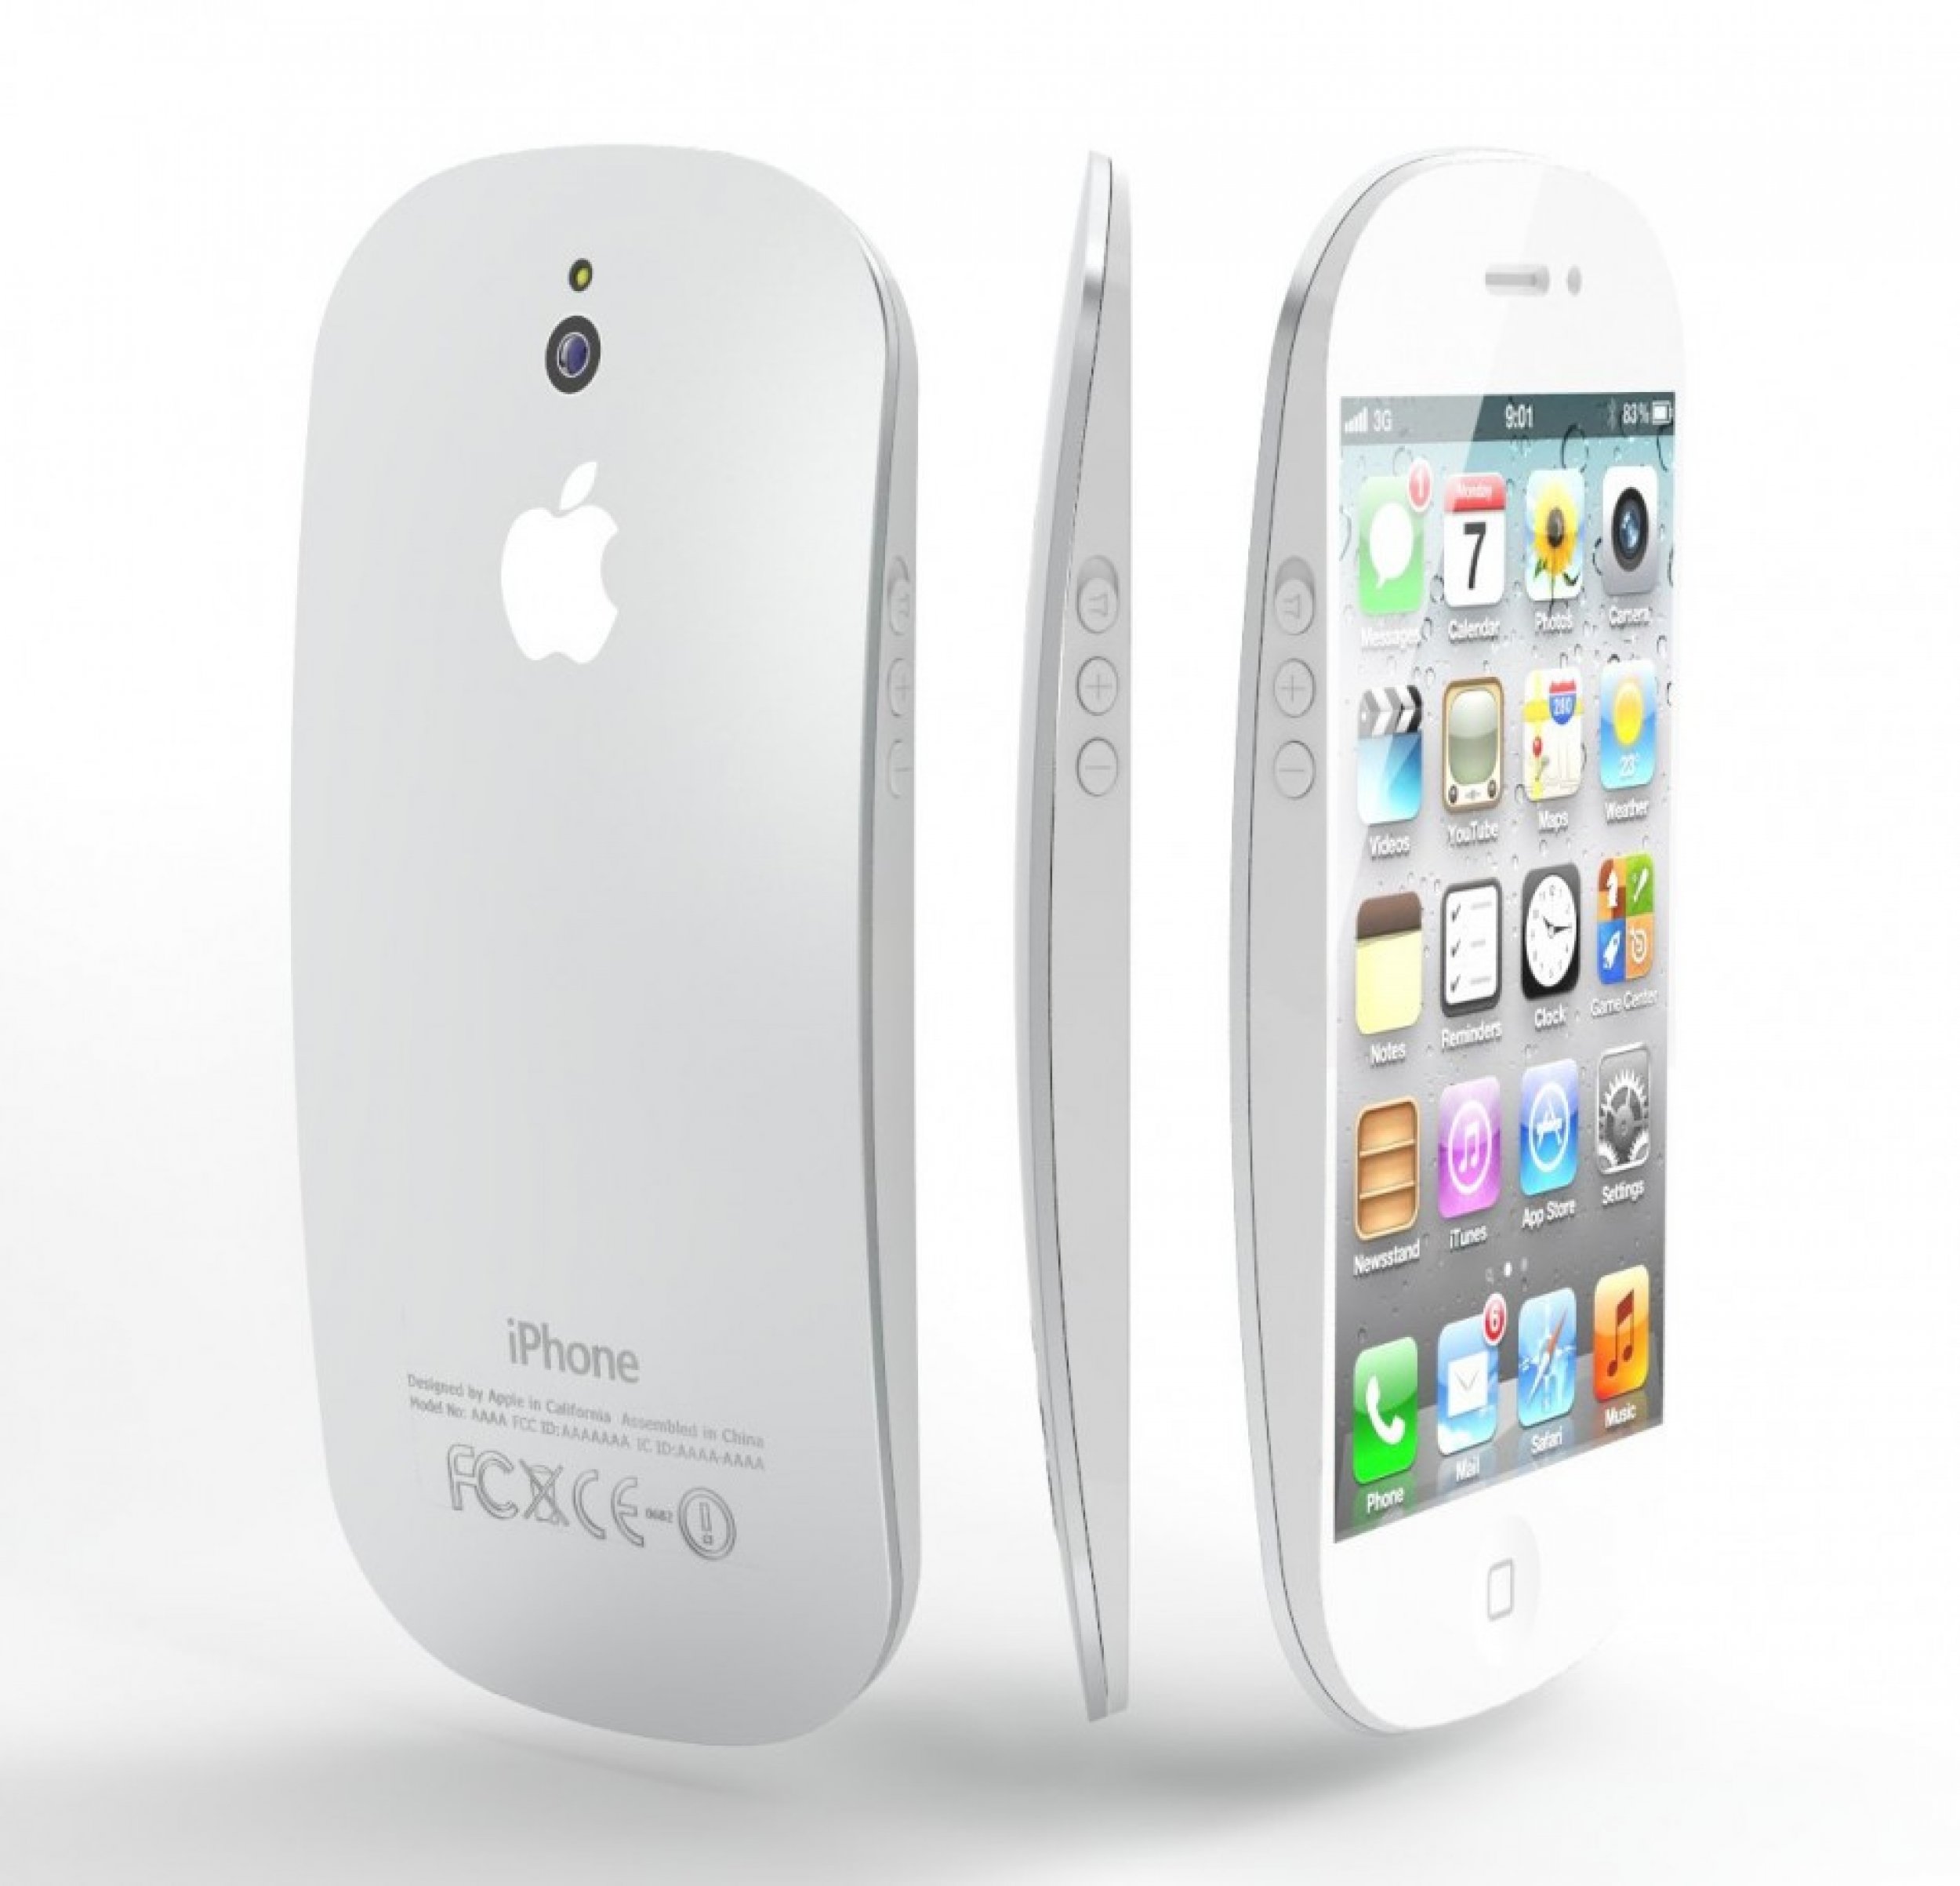 What Will The iPhone 5 Look Like